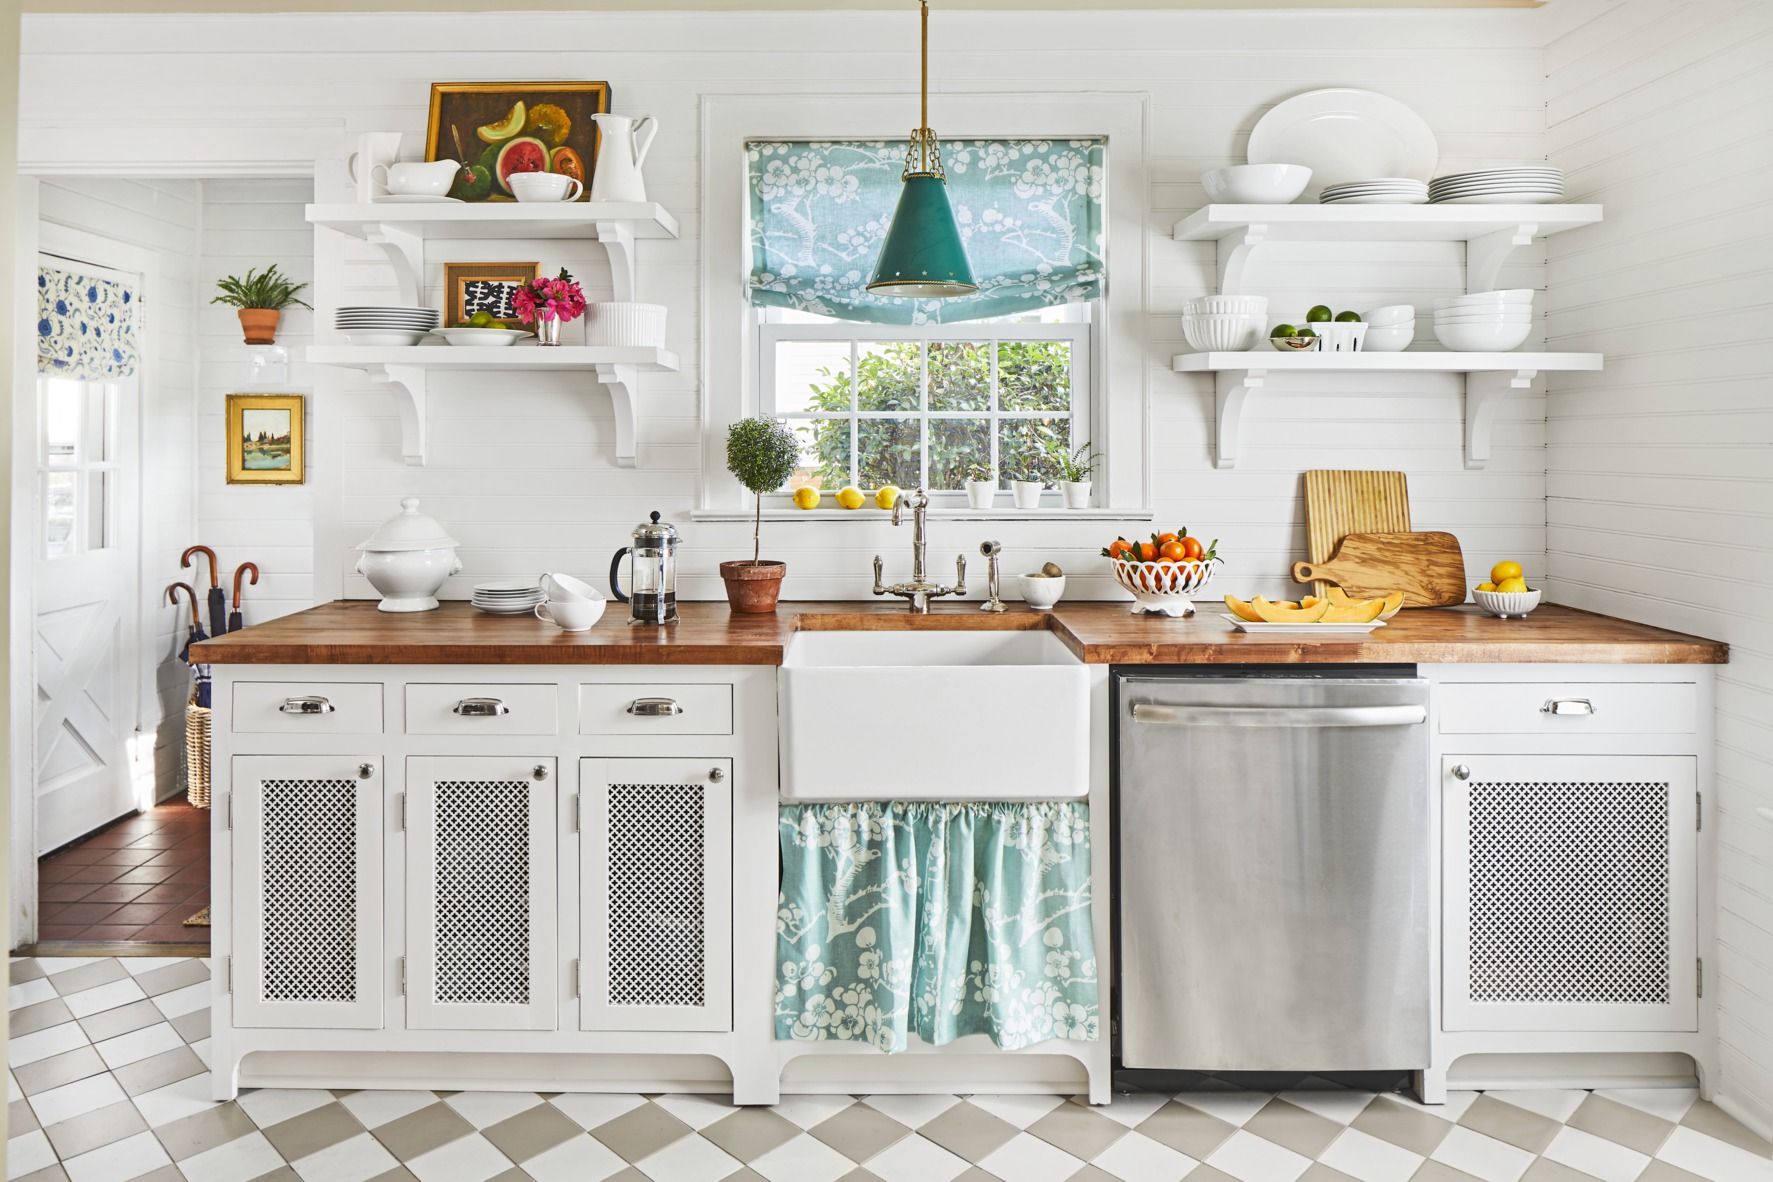 What is a retro kitchen?